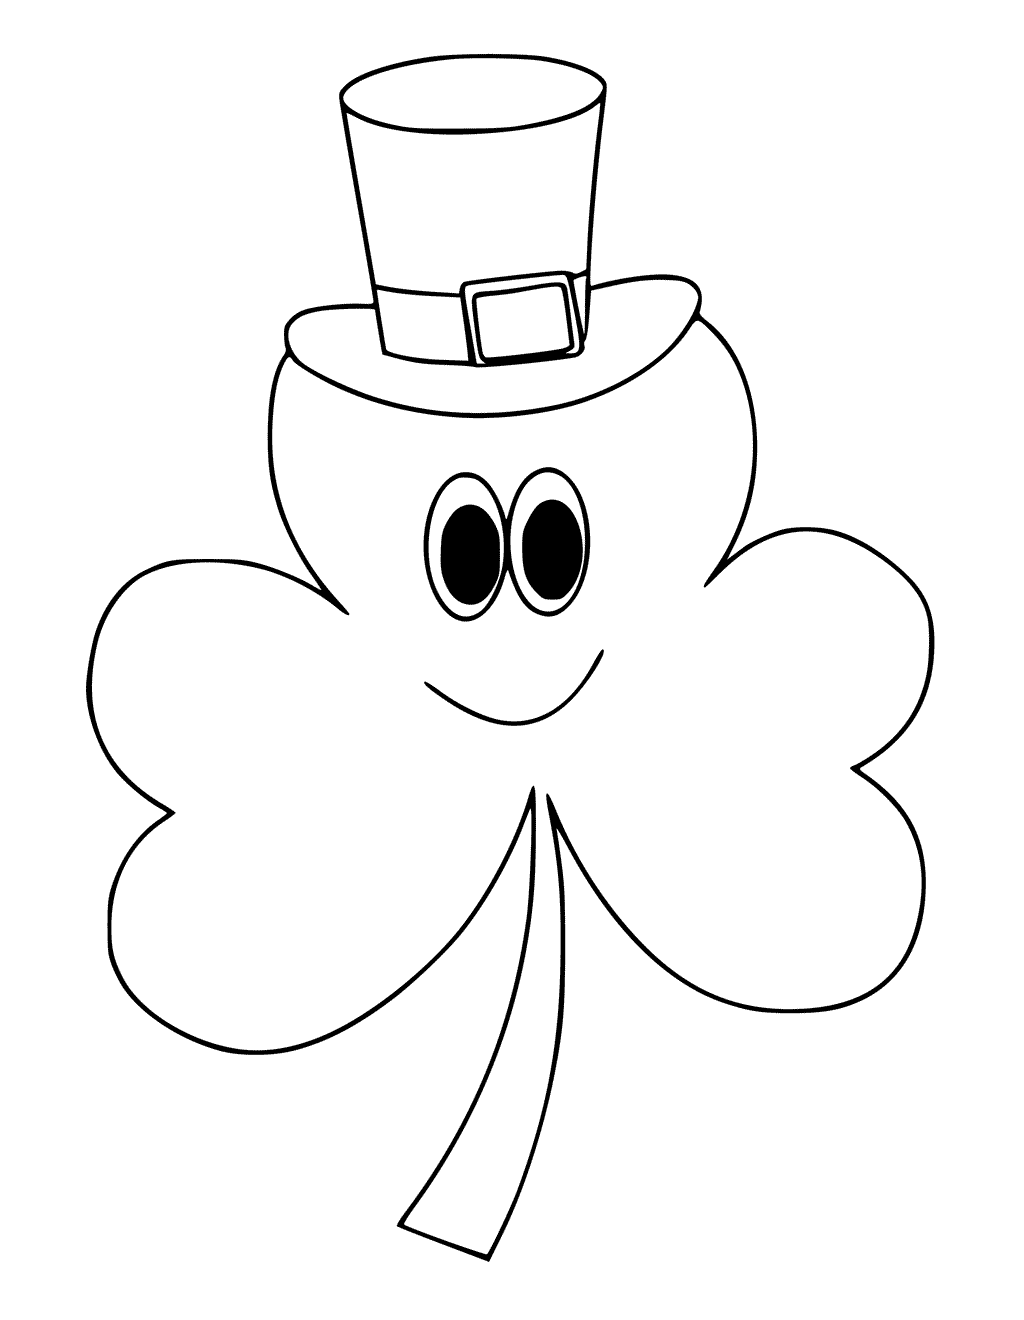 printable-shamrock-coloring-pages